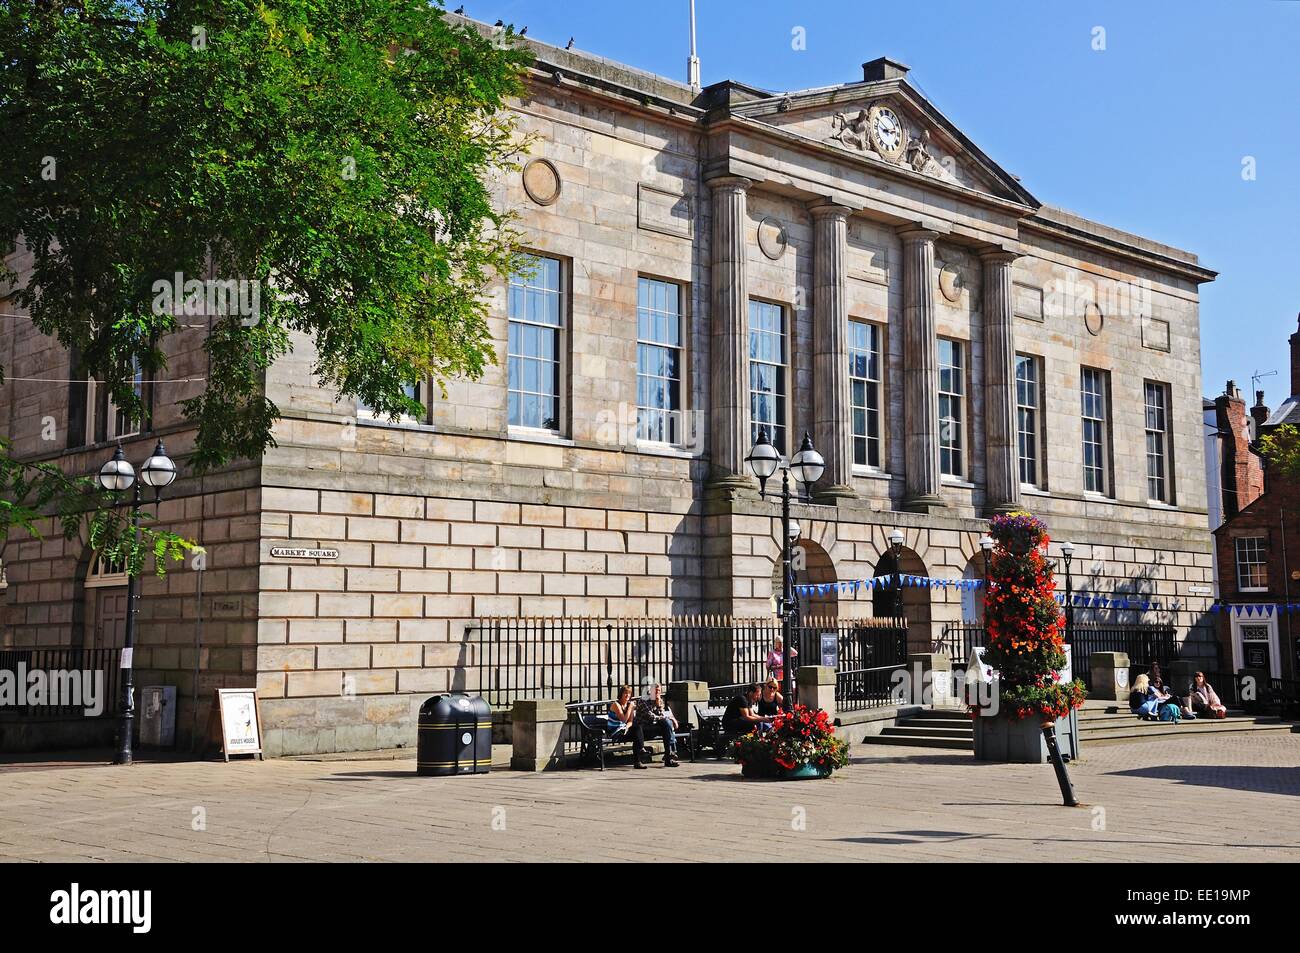 Shire Hall Gallery in Market Square, Stafford, Staffordshire, England, UK, Western Europe. Stock Photo